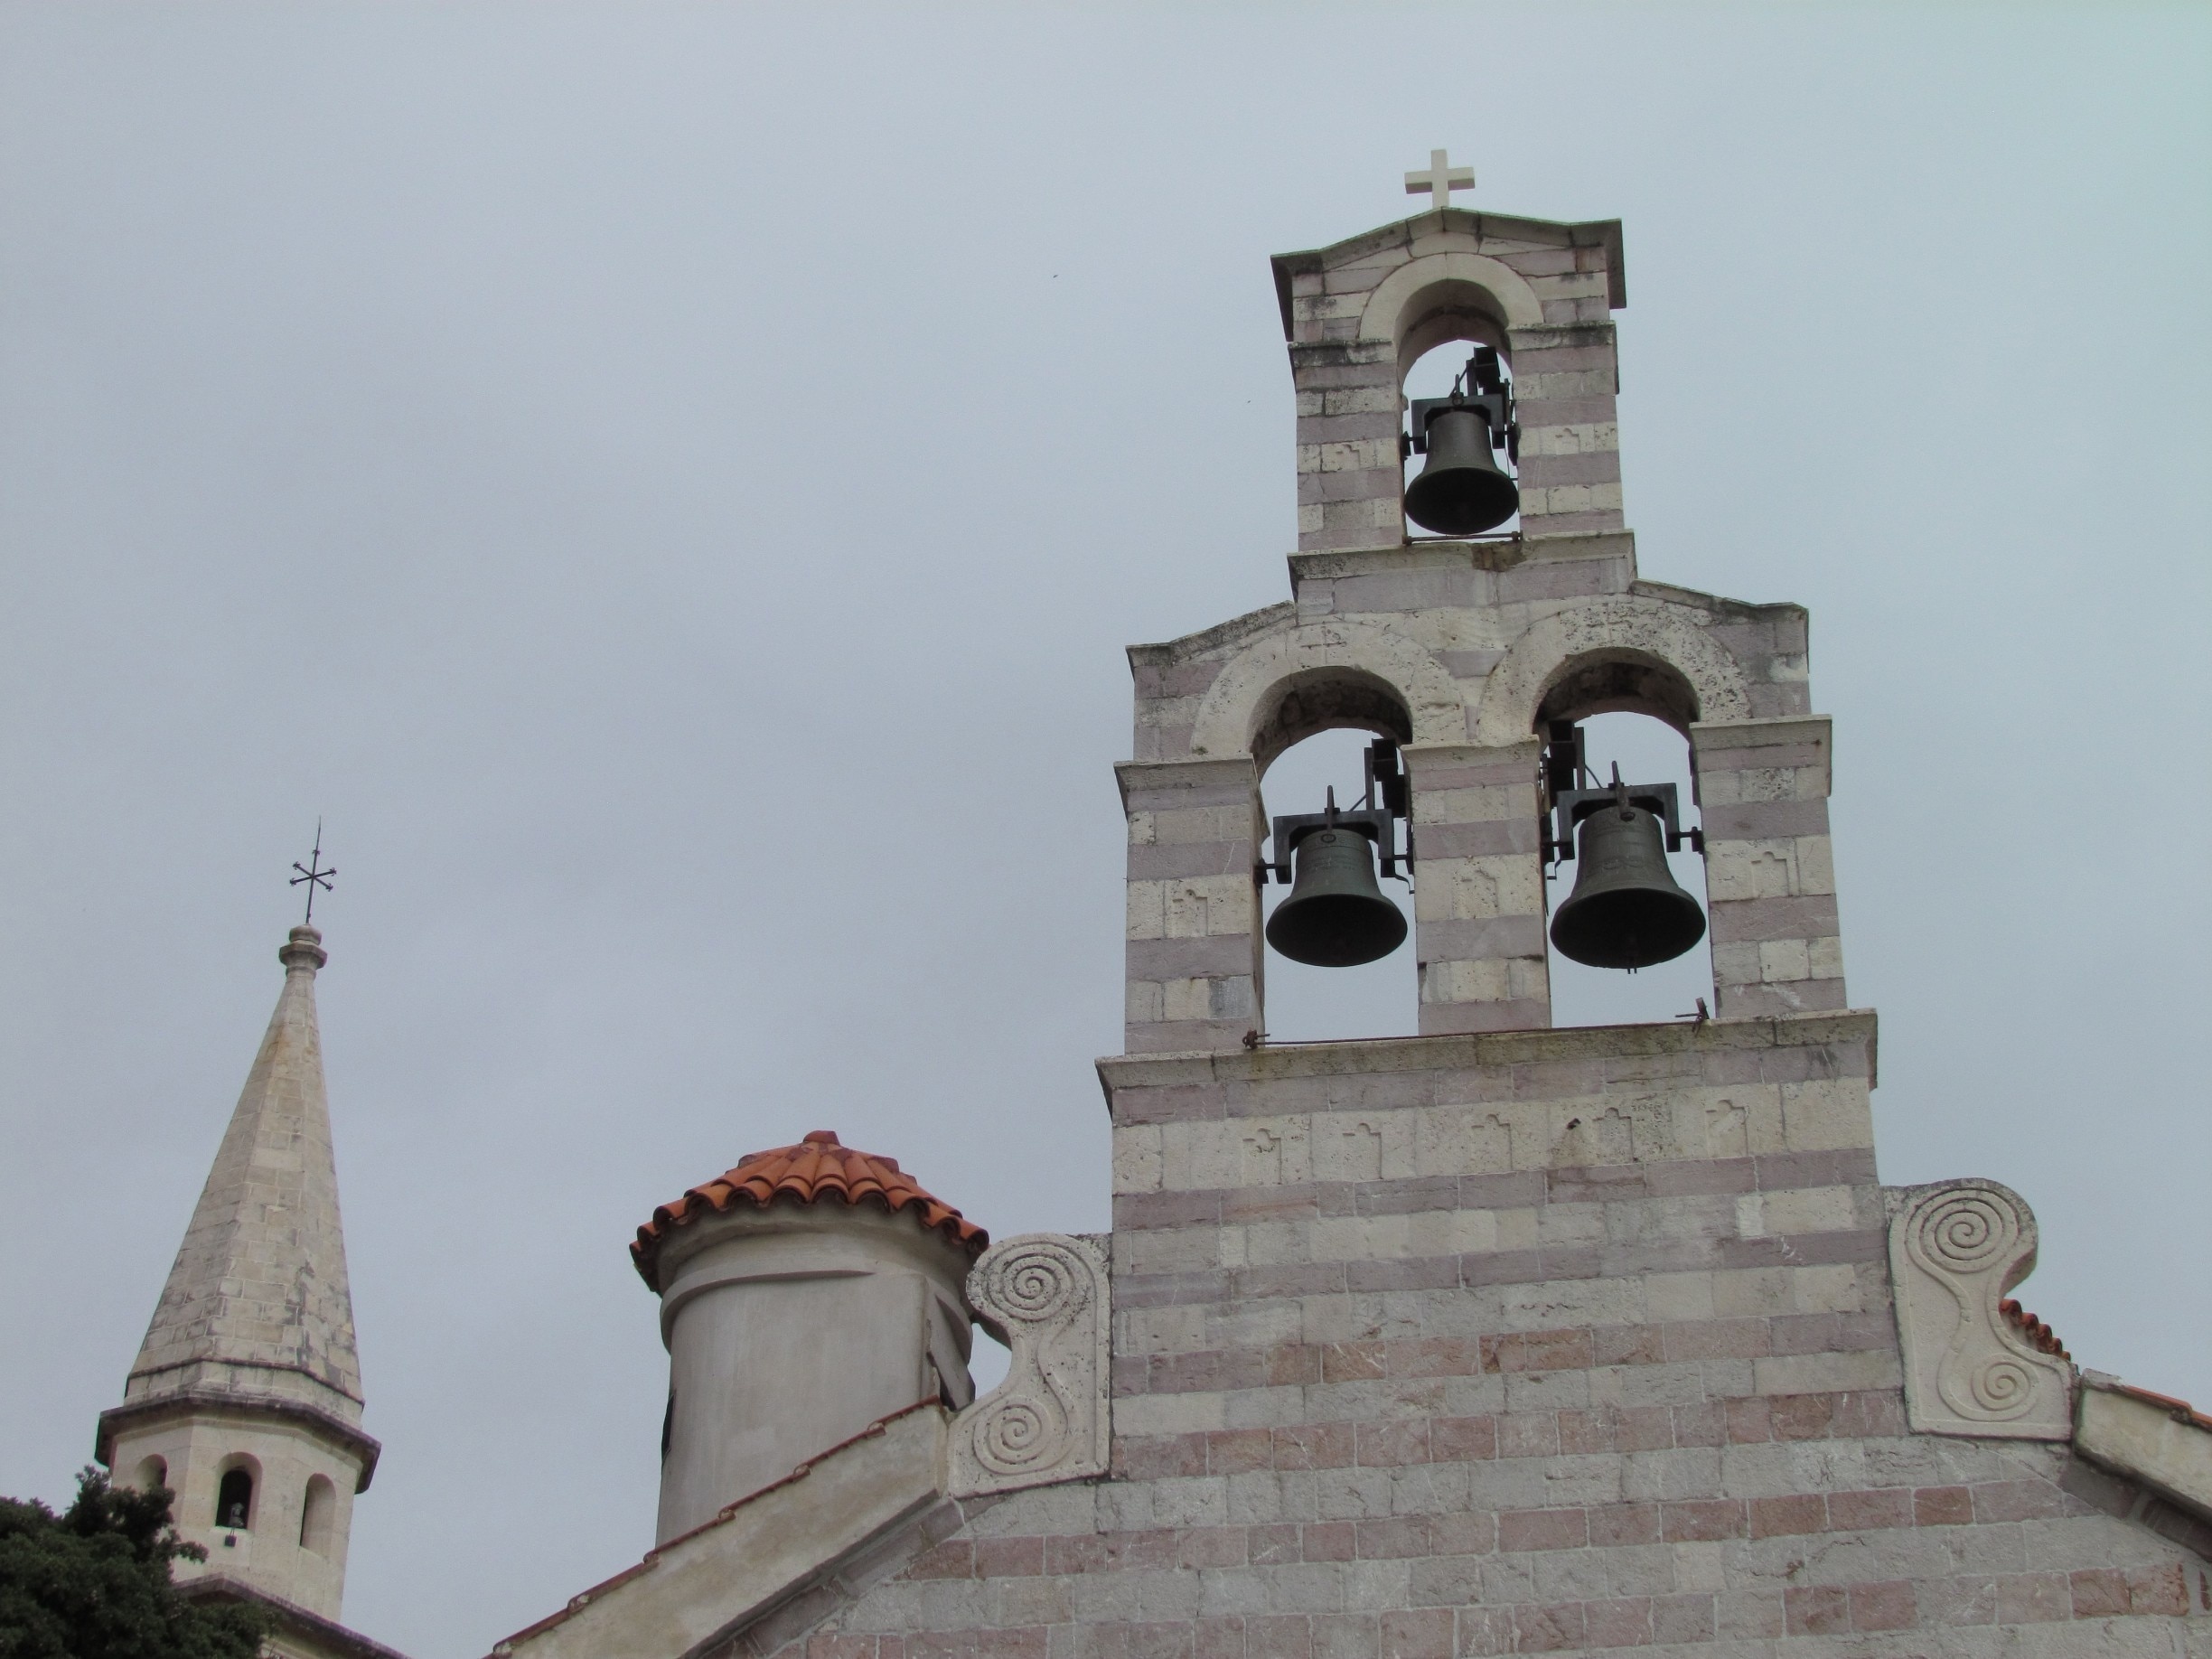 Budva is a beautiful town on the Adriatic sea.  The old town is great to wander around in.  This photo represents three religions existing in harmony; Muslim, Orthodox and Christian.